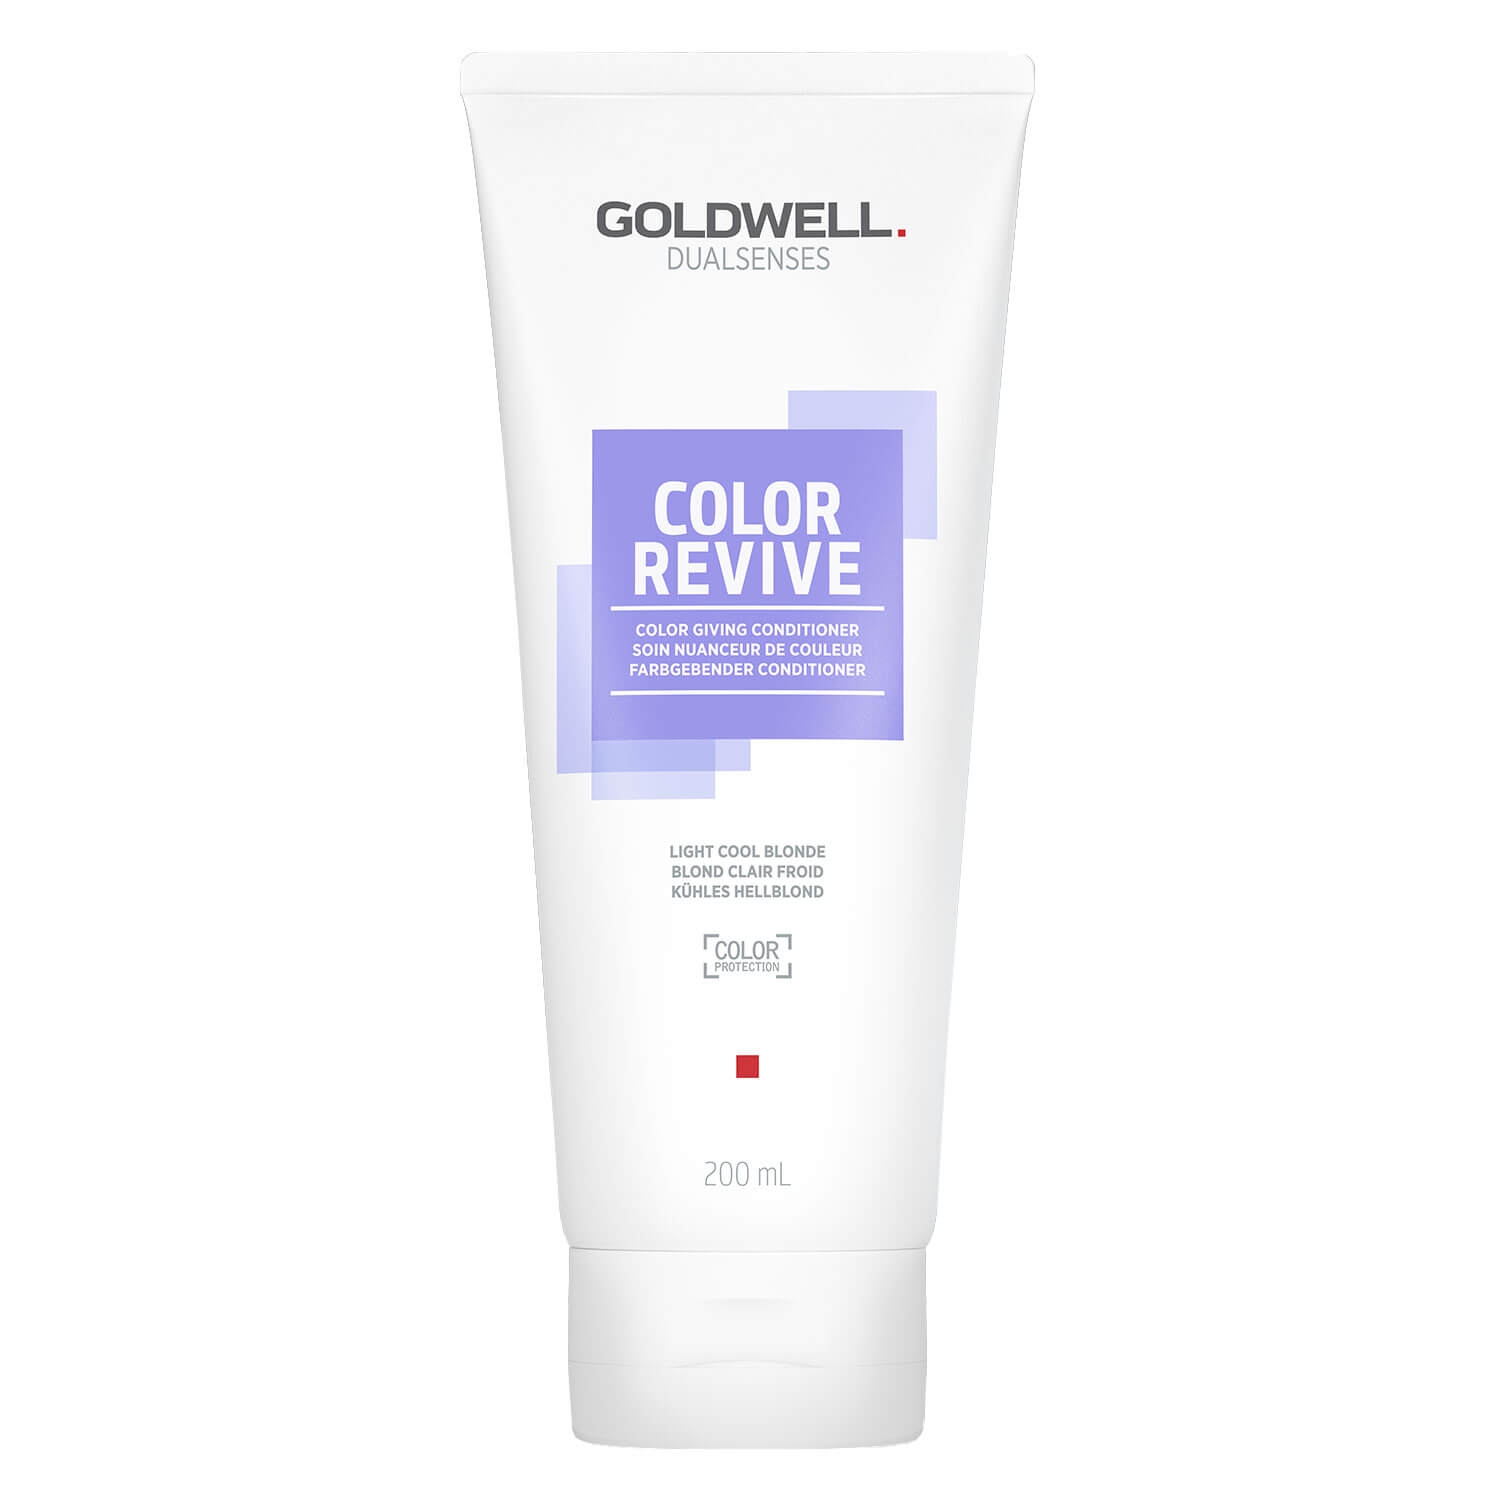 Product image from Dualsenses Color Revive - Color Conditioner Light Cool Blonde